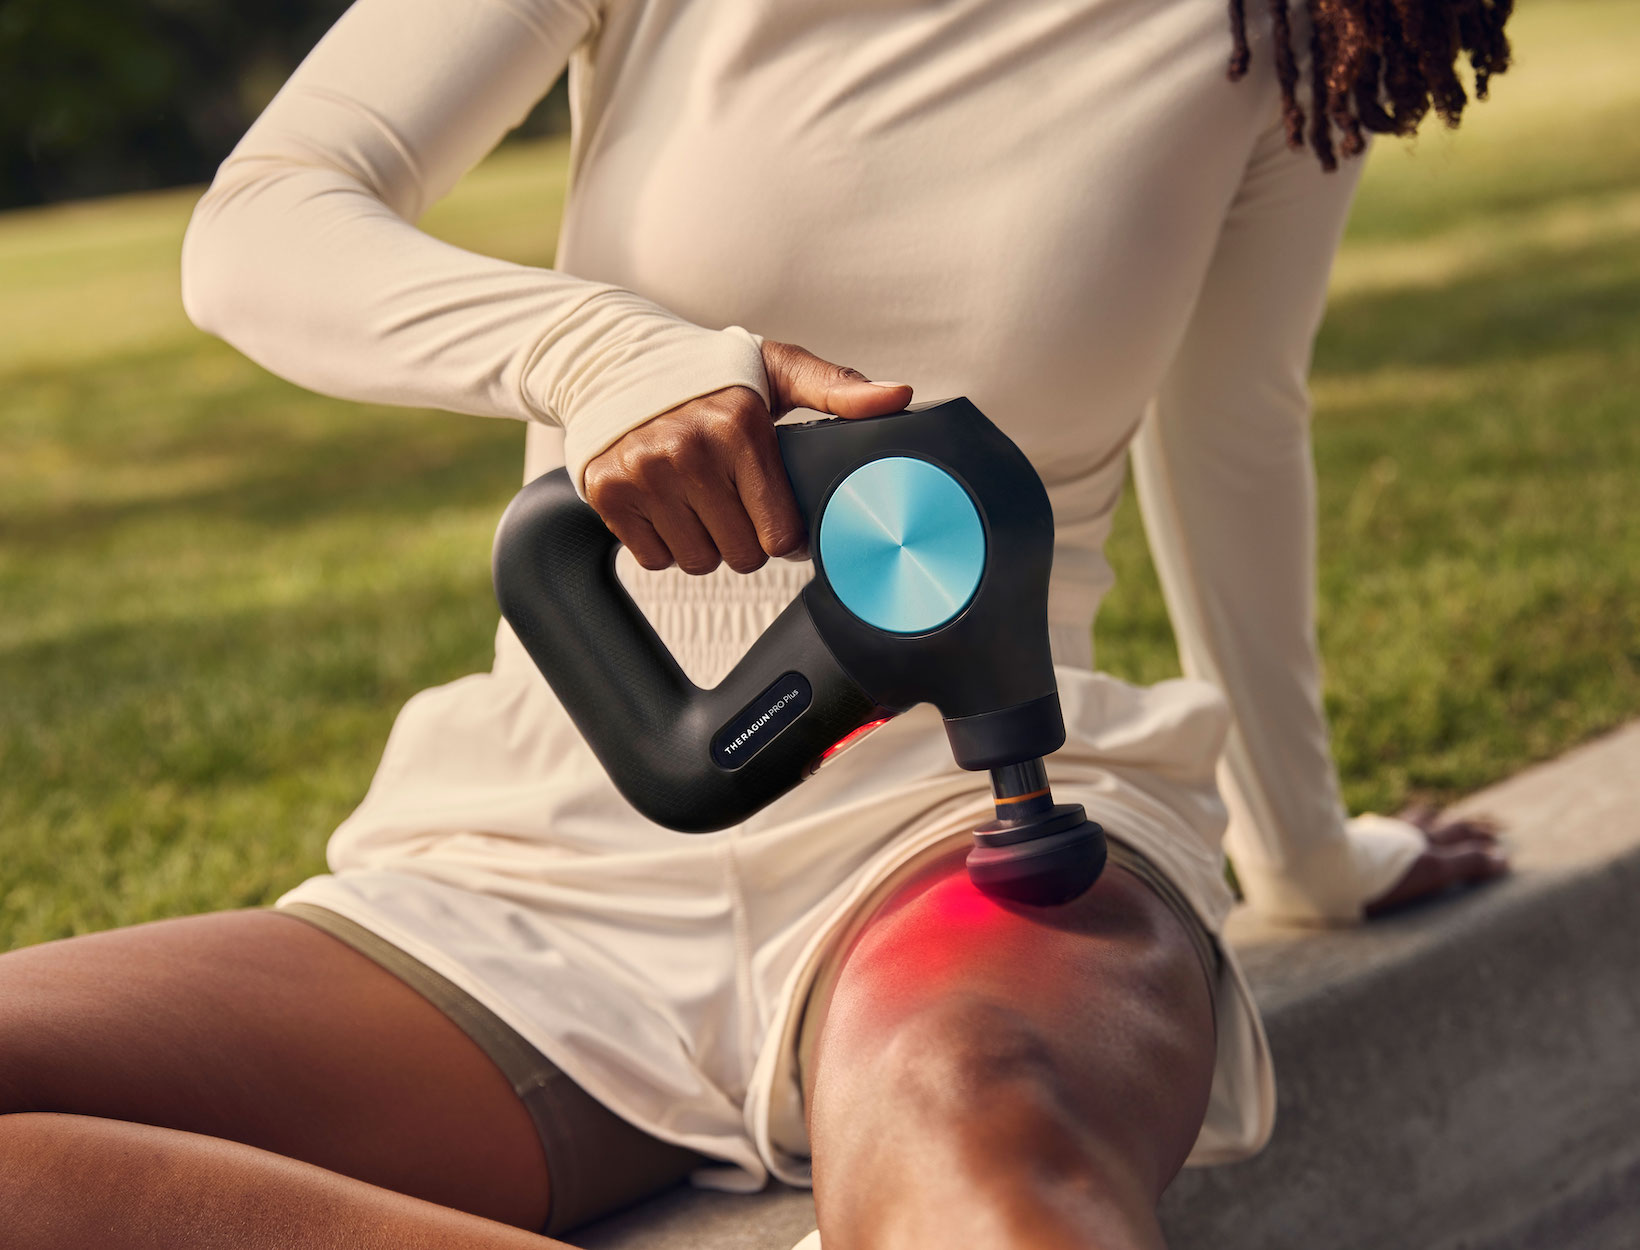 How To Use A Theragun Massage Gun For Muscle Recovery | Goop